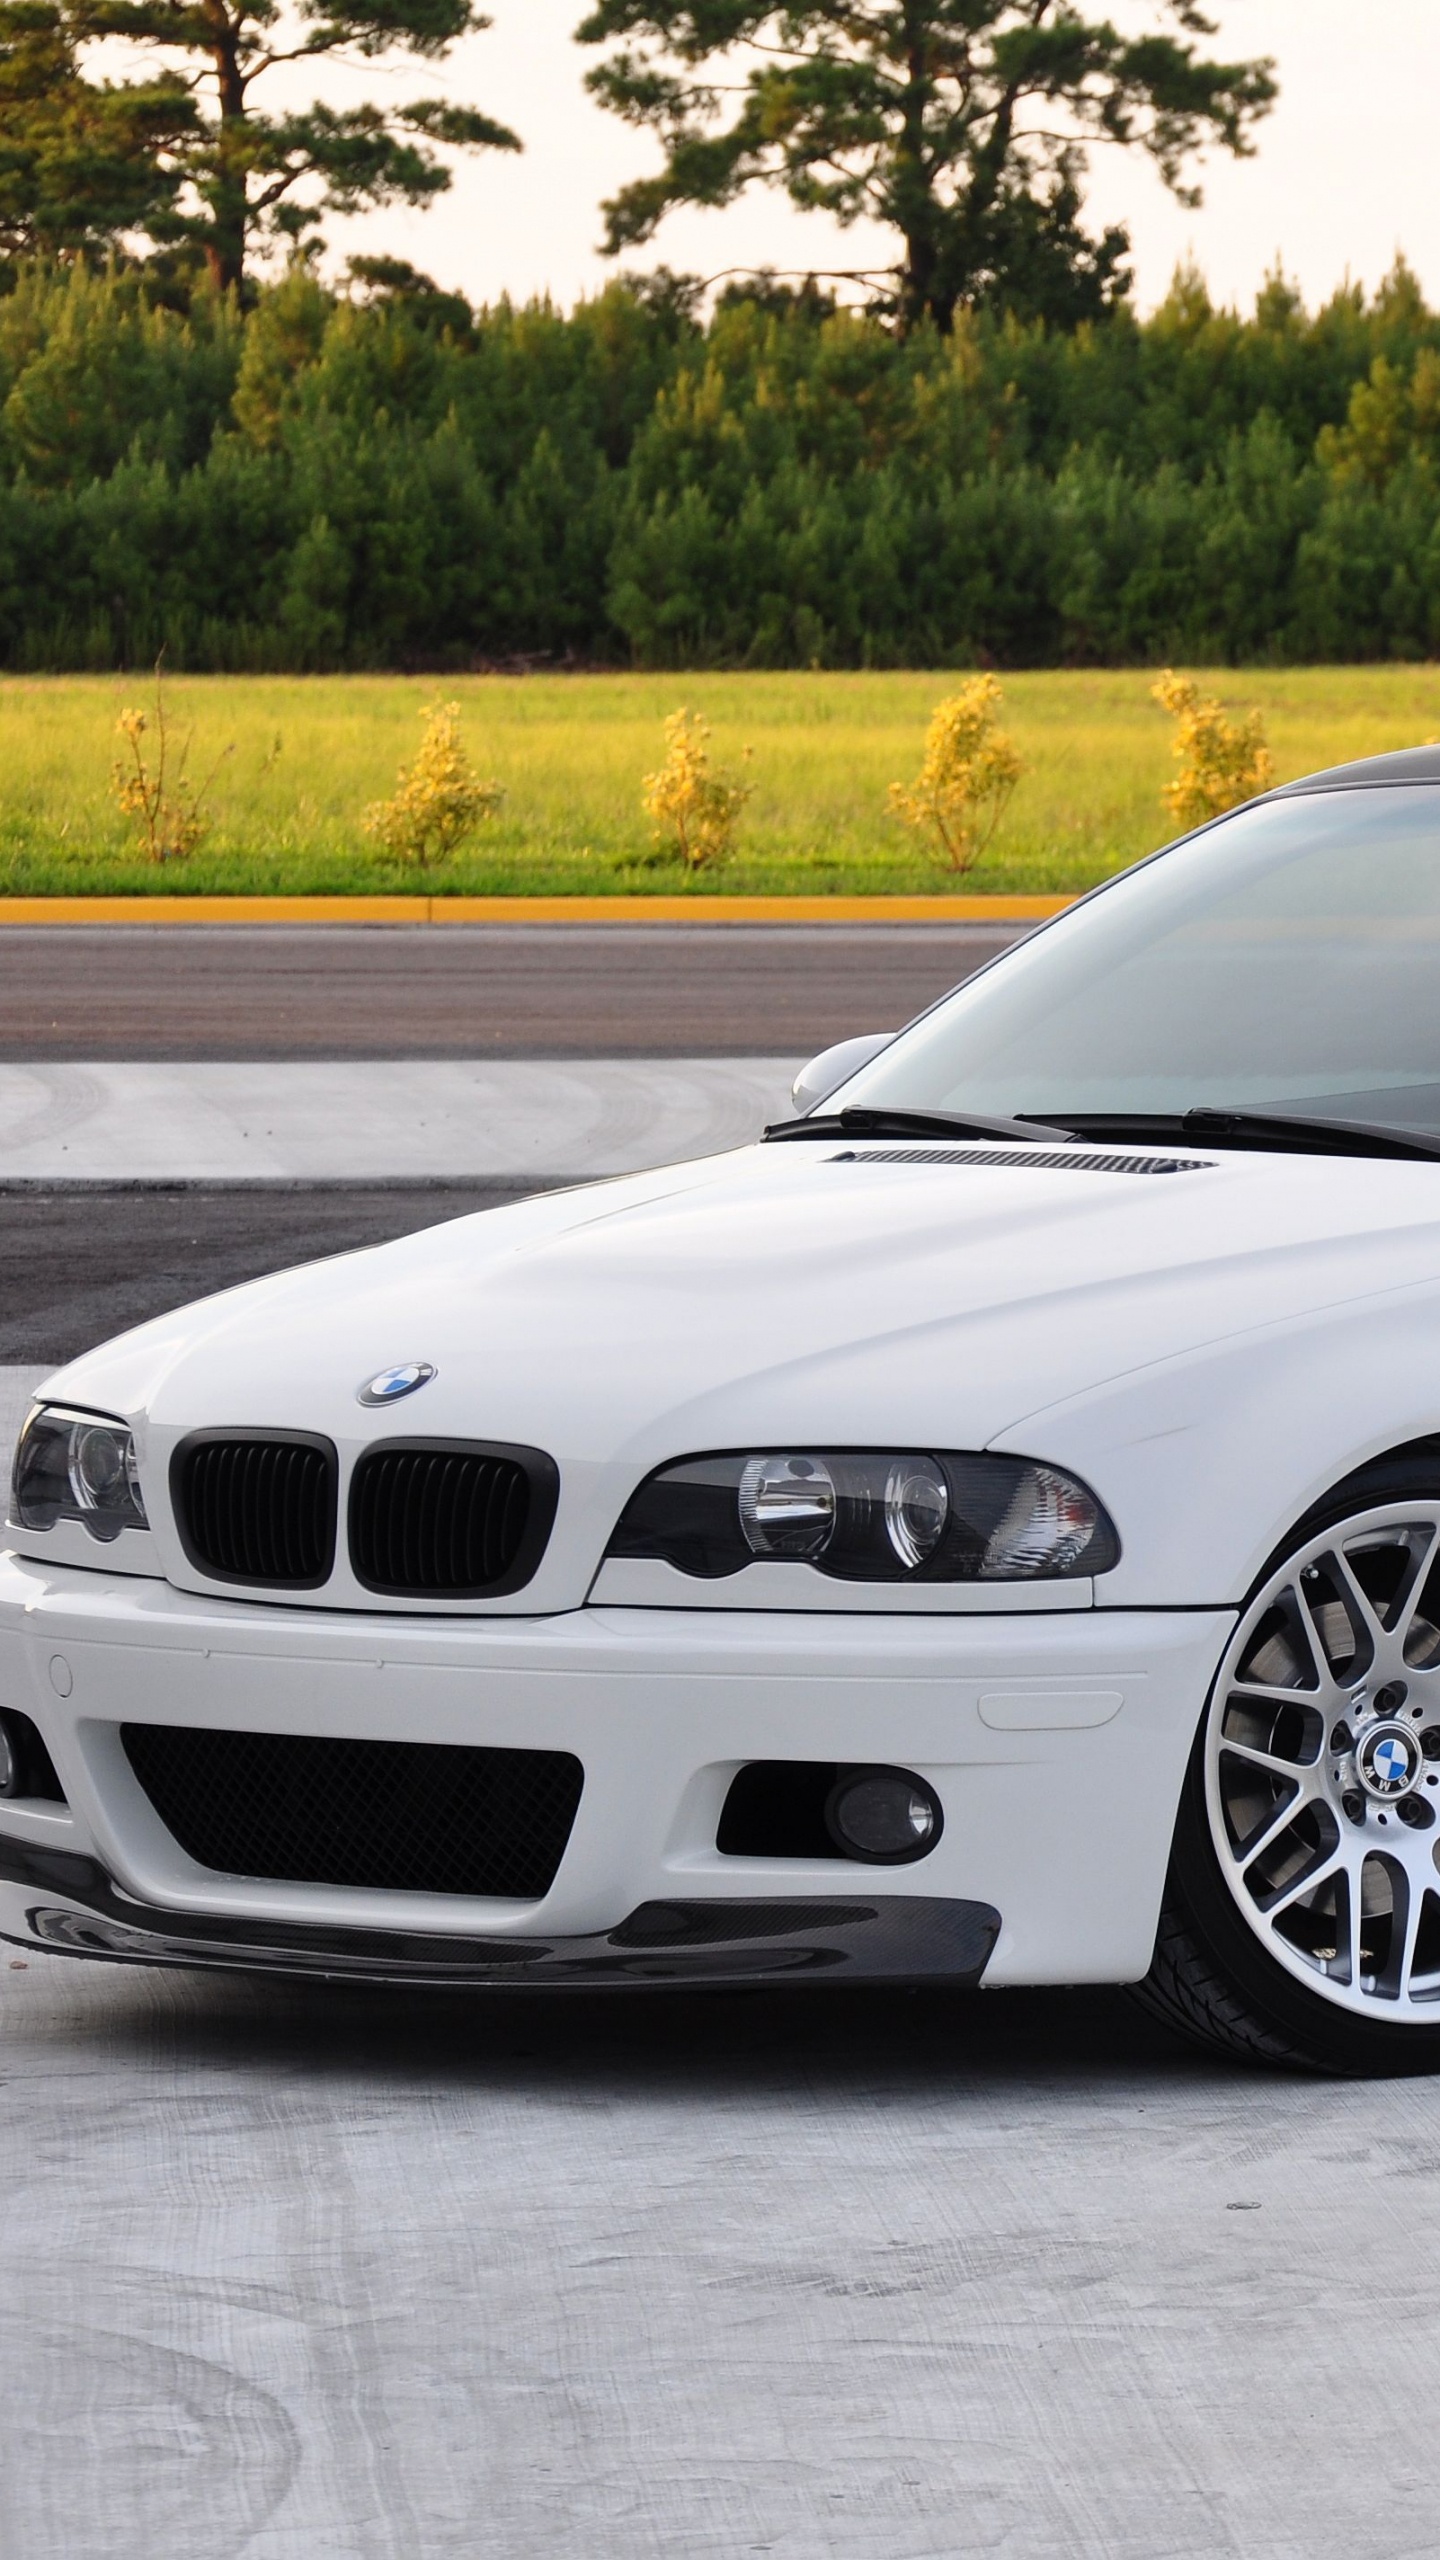 White Bmw m 3 Coupe on Road During Daytime. Wallpaper in 1440x2560 Resolution